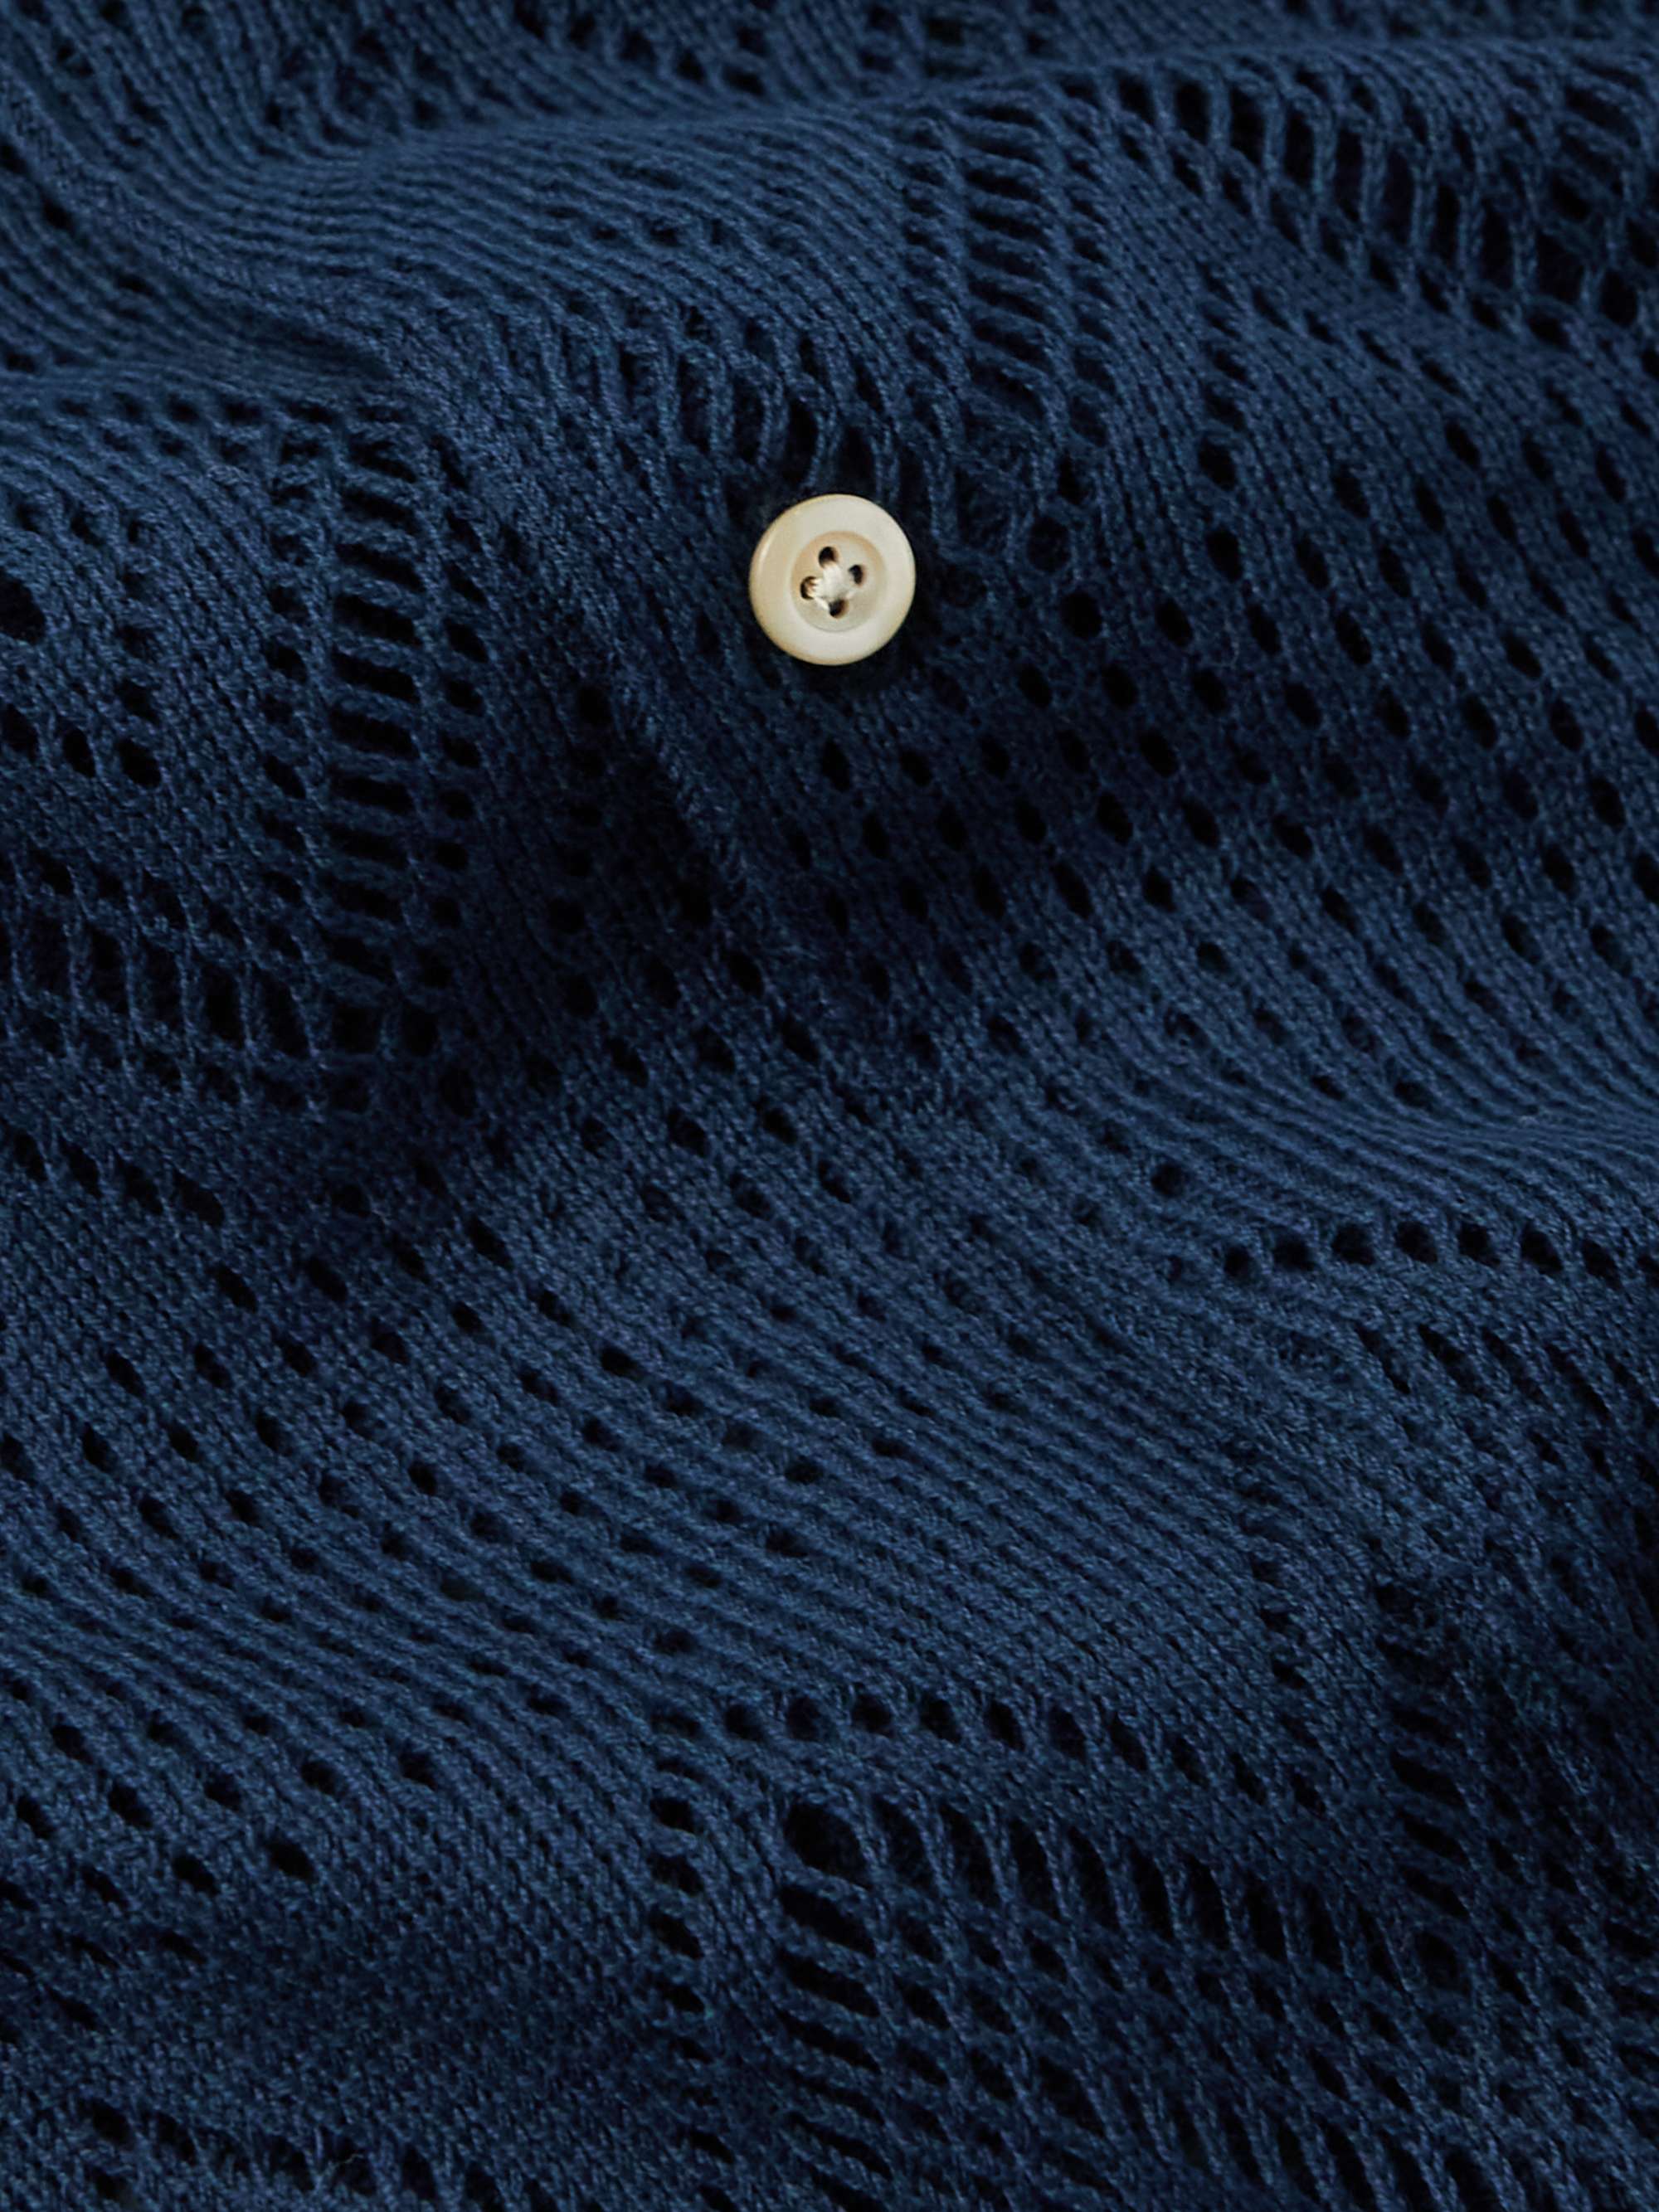 A KIND OF GUISE Gioia Camp-Collar Crocheted Cotton Shirt